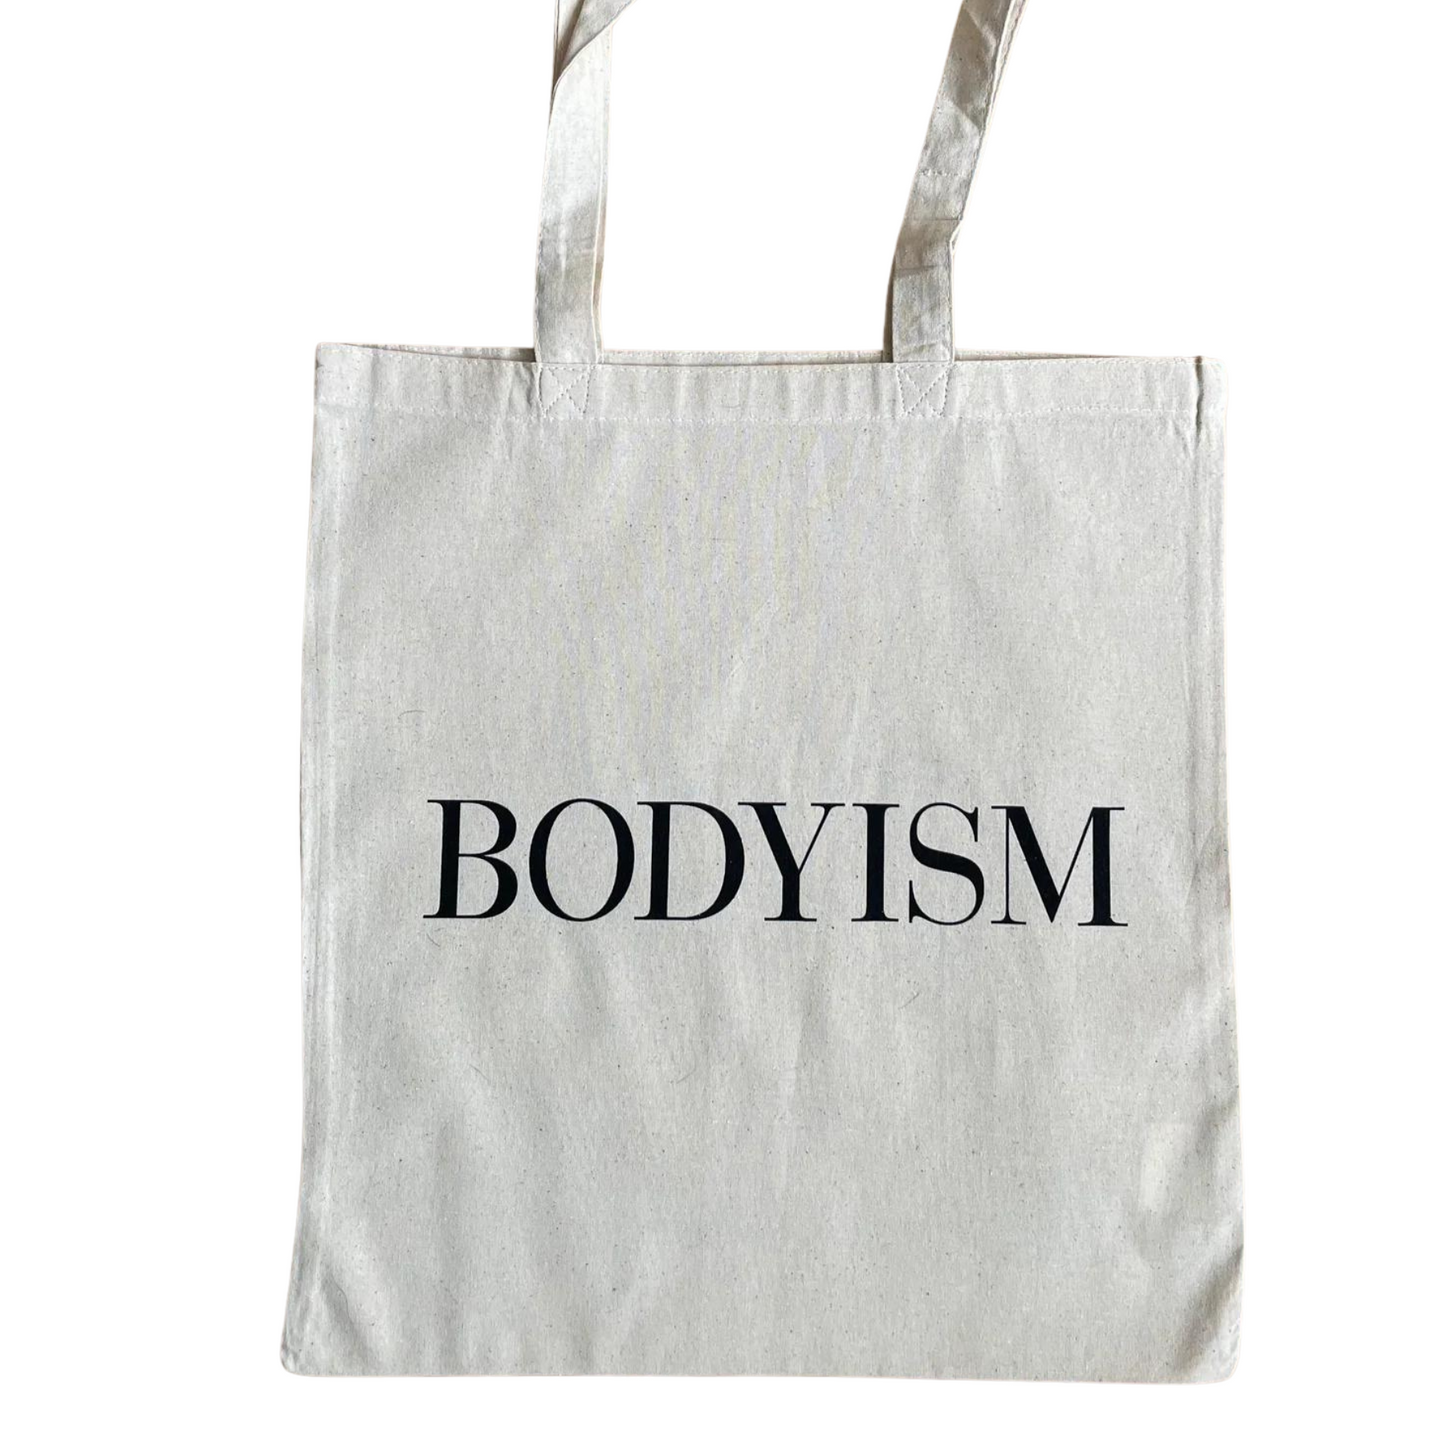 Bodyism Tote Bag